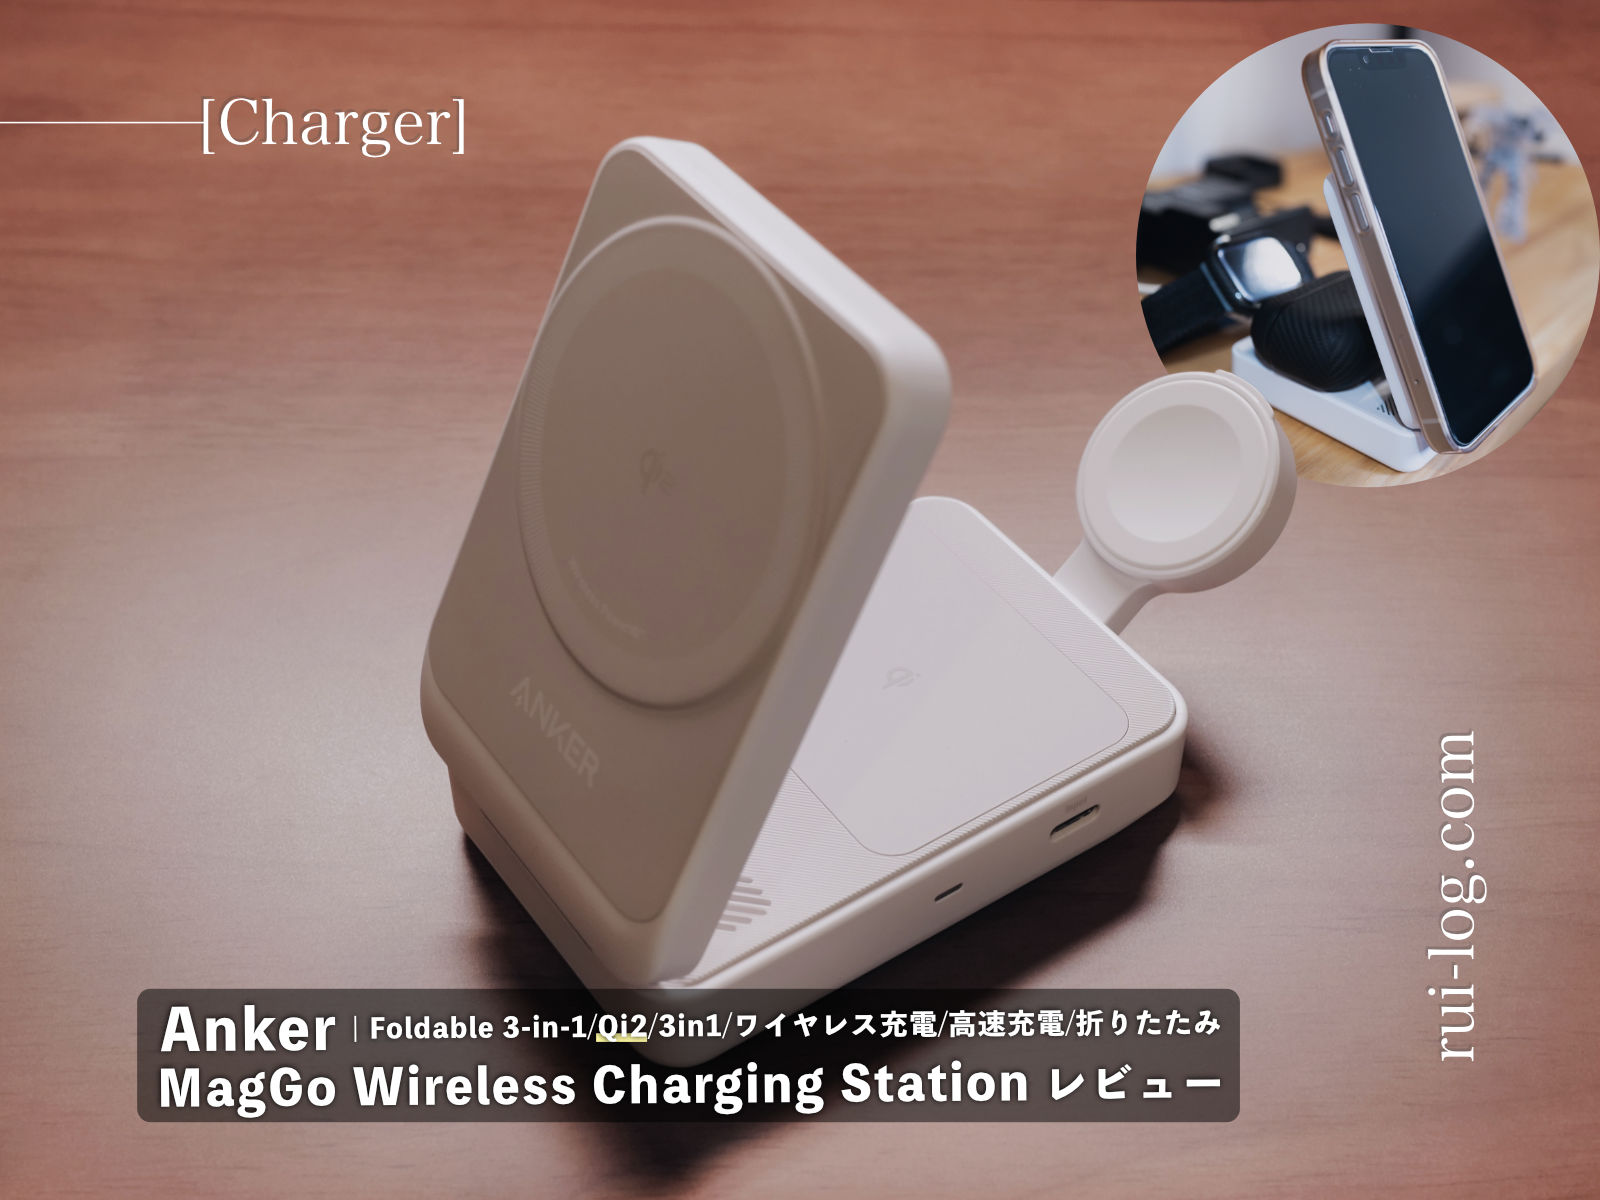 Anker MagGo Wireless Charging Station (Foldable 3-in-1) レビュー。Qi2対応の3in1ワイヤレス充電器でiPhone・Apple Watch・AirPodsを高速充電できる！